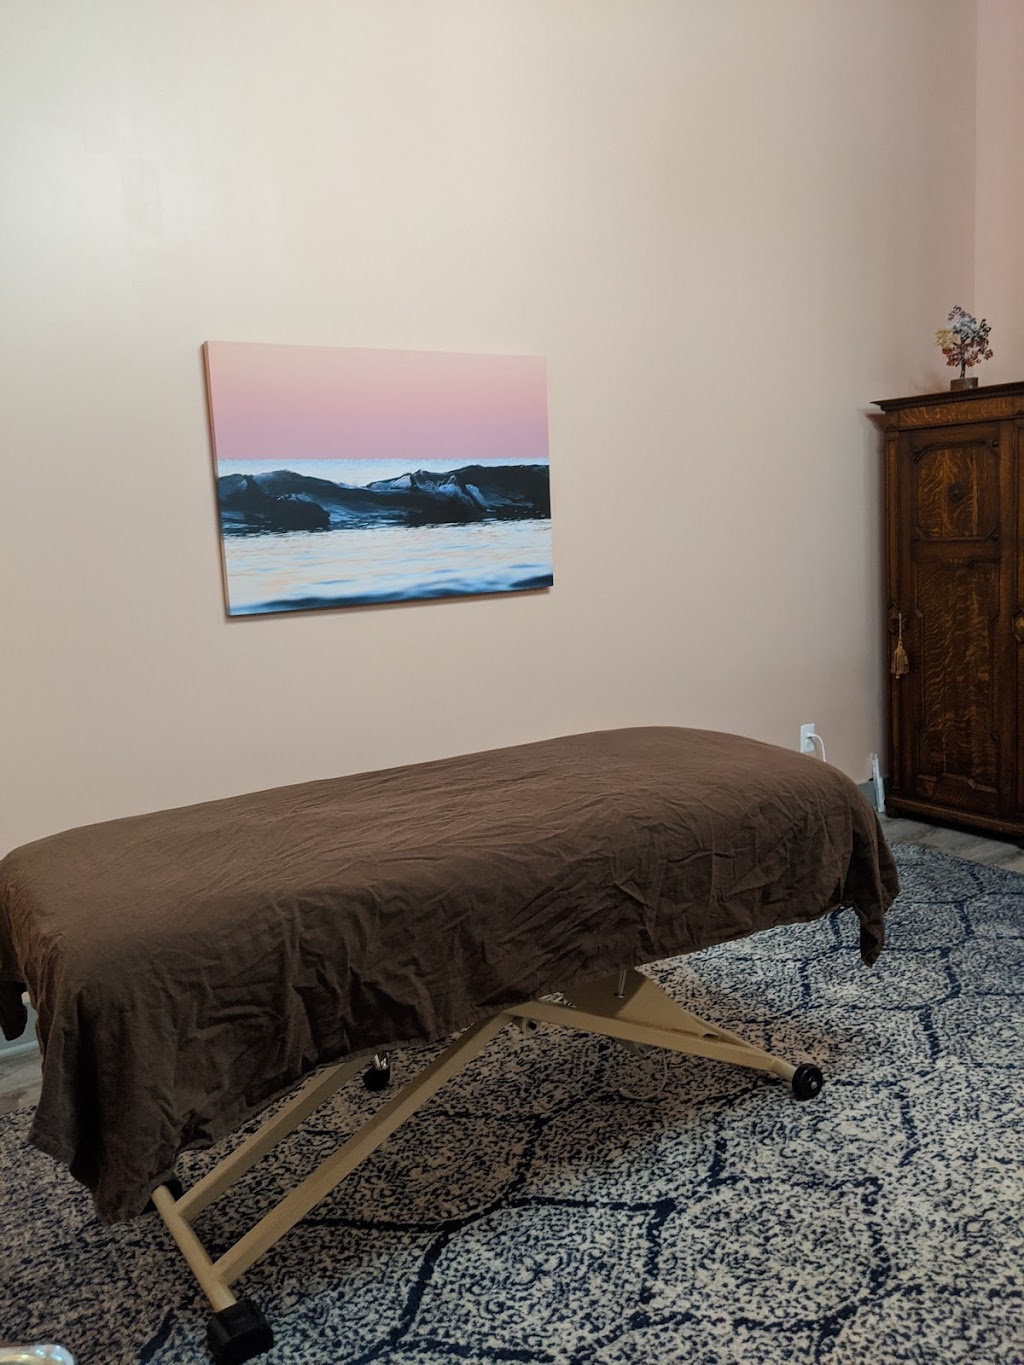 CT Center for CranioSacral Therapy | 143 West St, New Milford, CT 06776 | Phone: (860) 488-0948